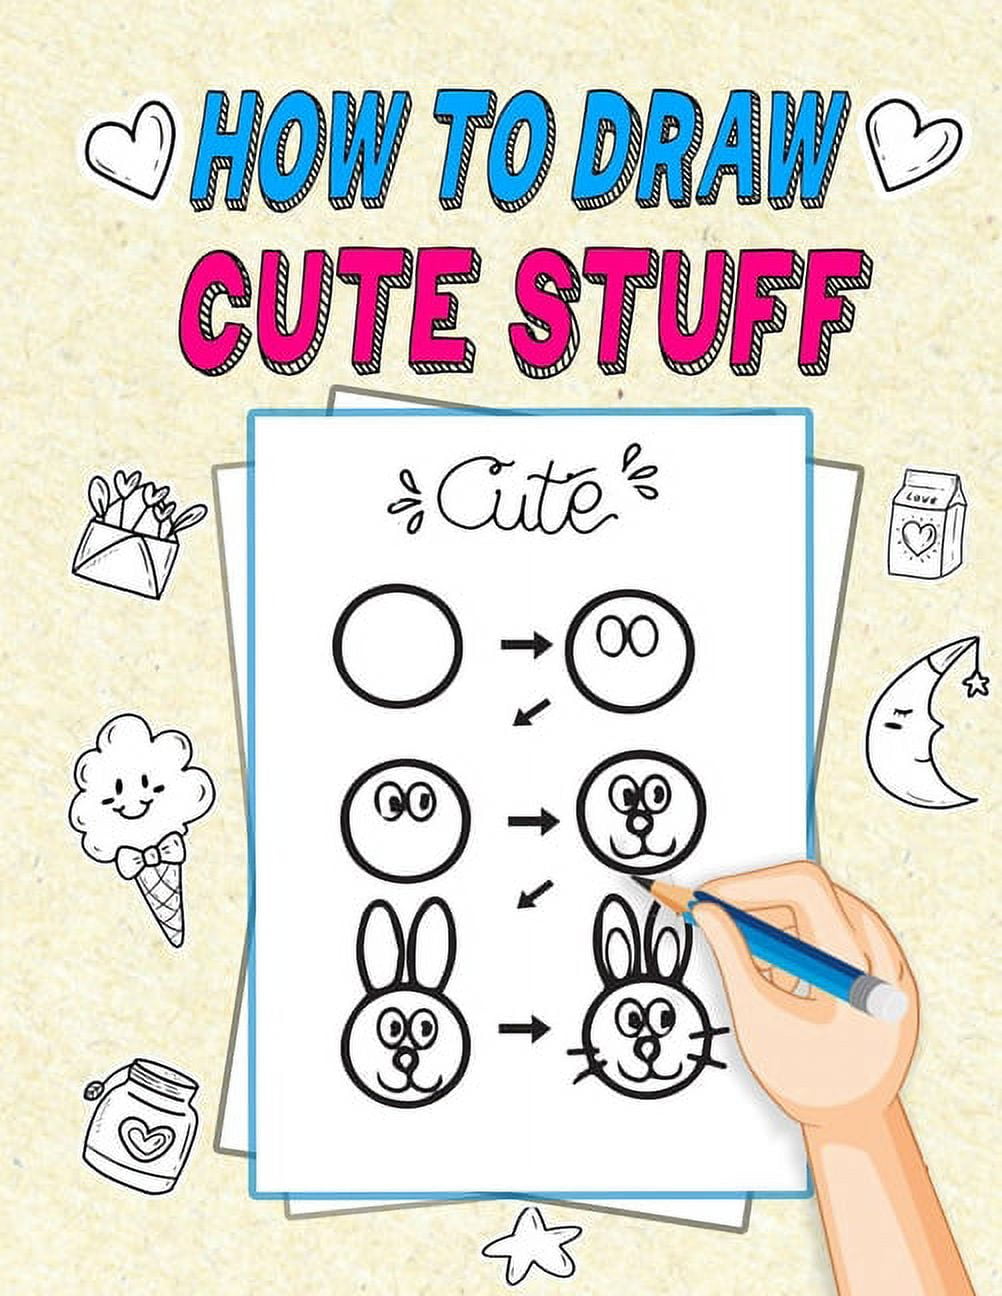 How To Draw Cute Stuff For Kids 33 Simple and Easy Step-by-Step Guide